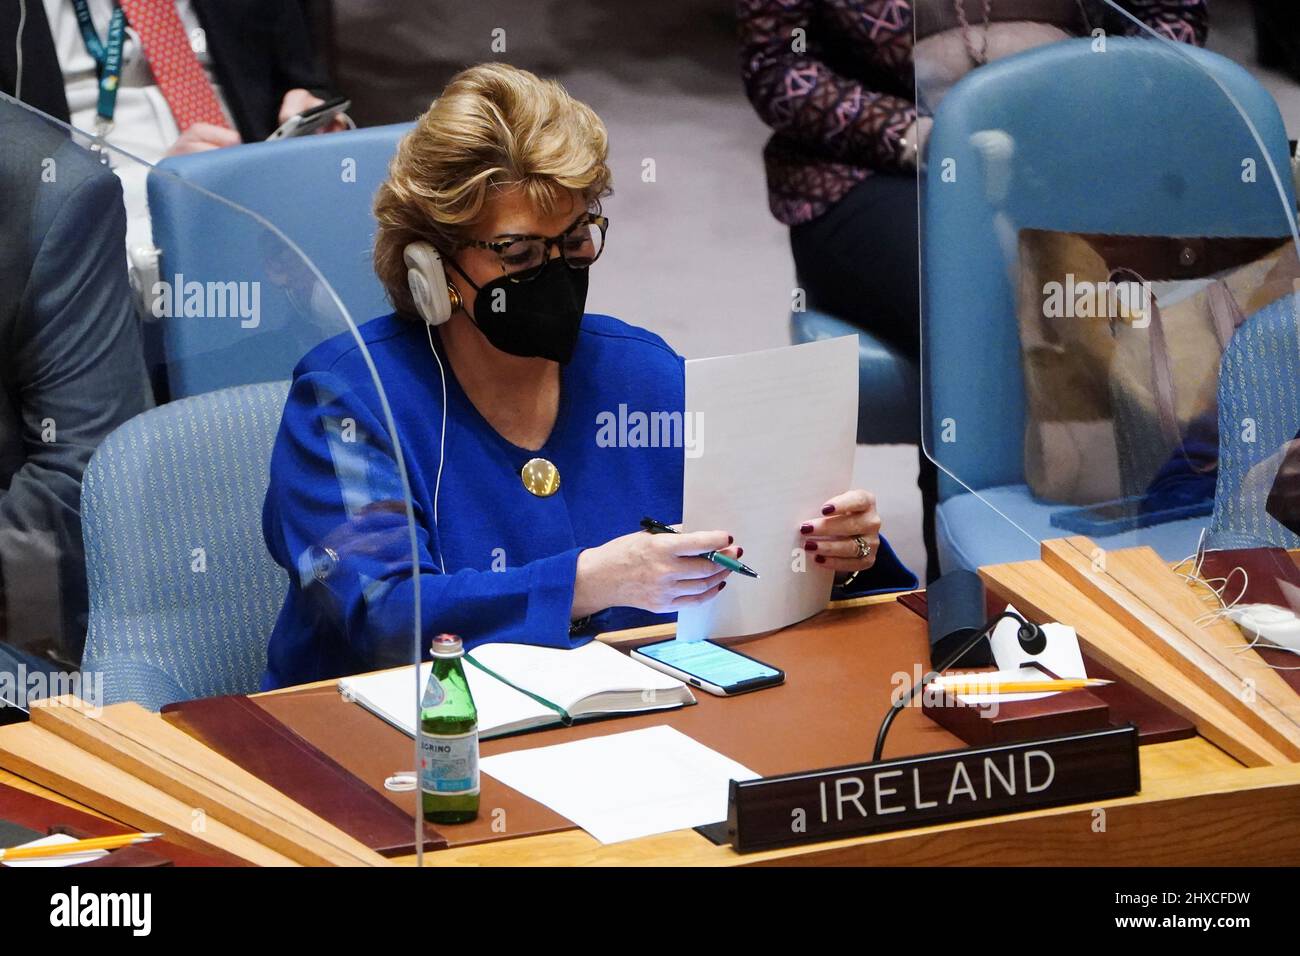 Ireland's Permanent Representative to the U.N. Geraldine Byrne Nason attends the United Nations Security Council meeting on Threats to International Peace and Security, following Russia's invasion of Ukraine, in New York City, U.S. March 11, 2022. REUTERS/Carlo Allegri Stock Photo